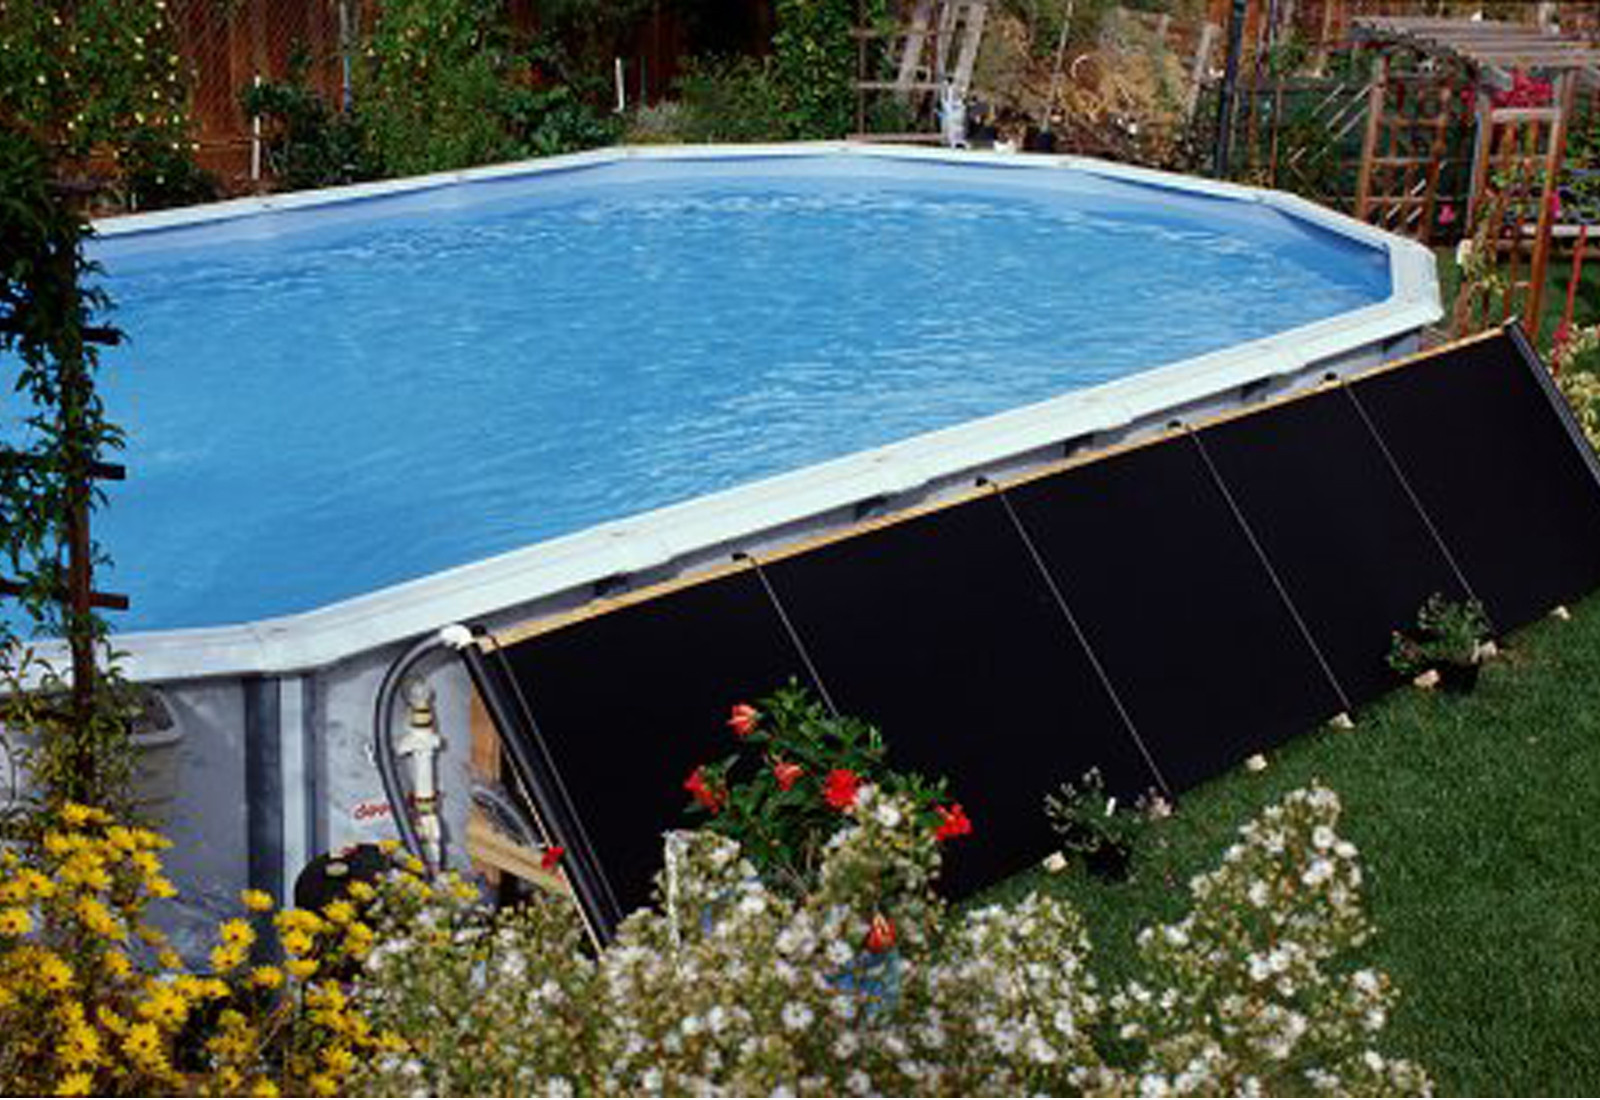 Pool Heater Above Ground
 Fafco 2 2 x20 Add Ground Swimming Pool Solar